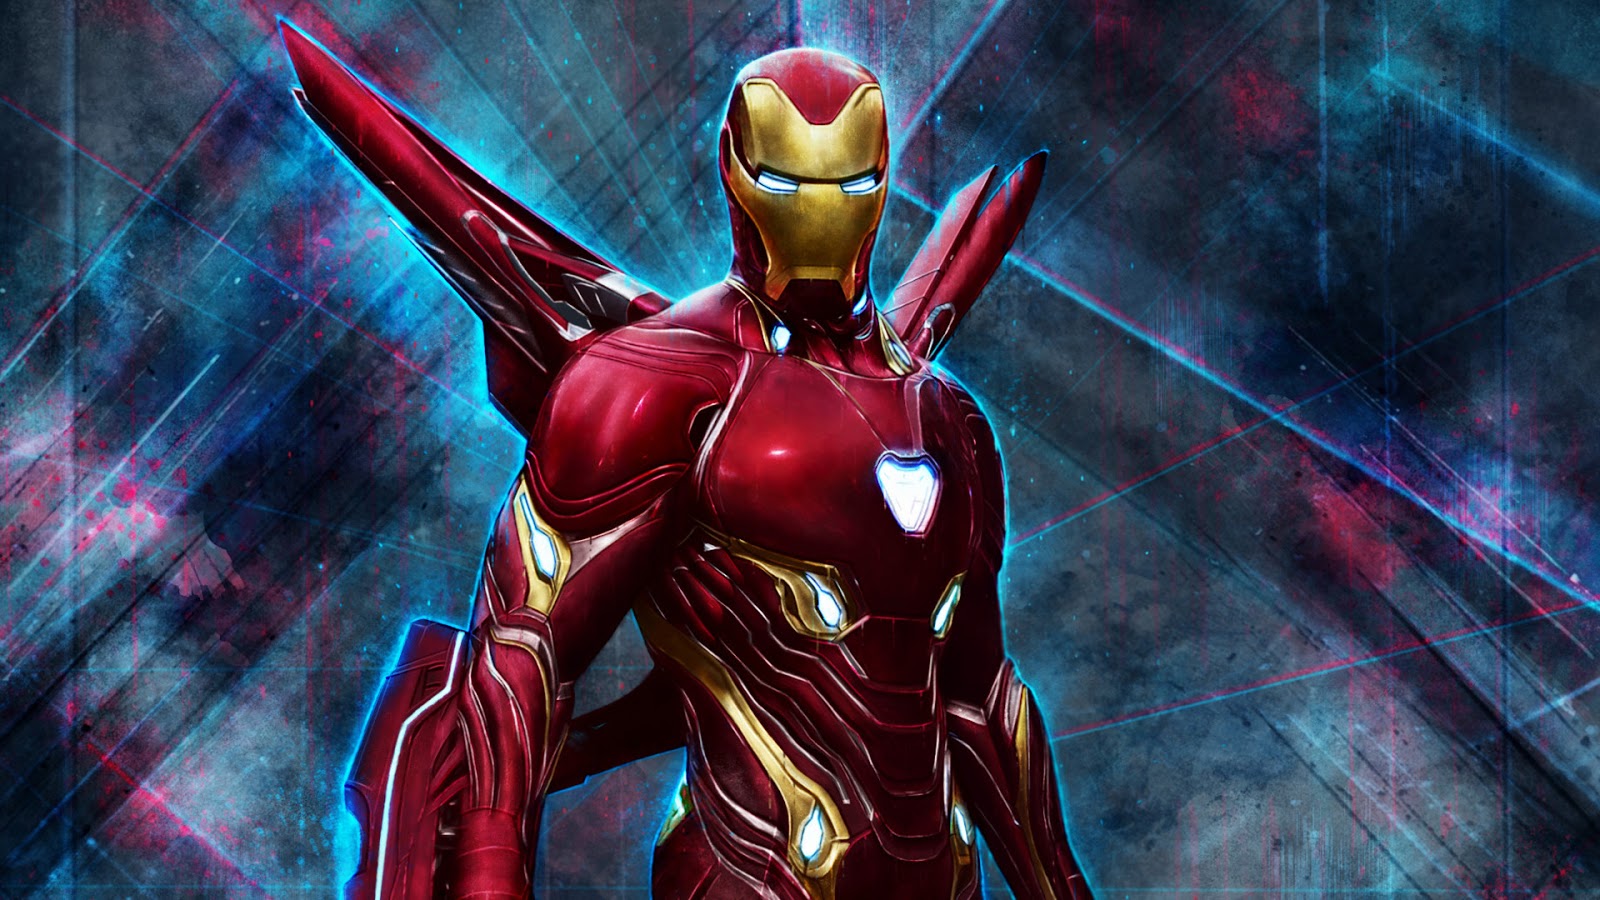 Iron Man Hd Wallpapers From Infinity War Download In 4k Whats Images